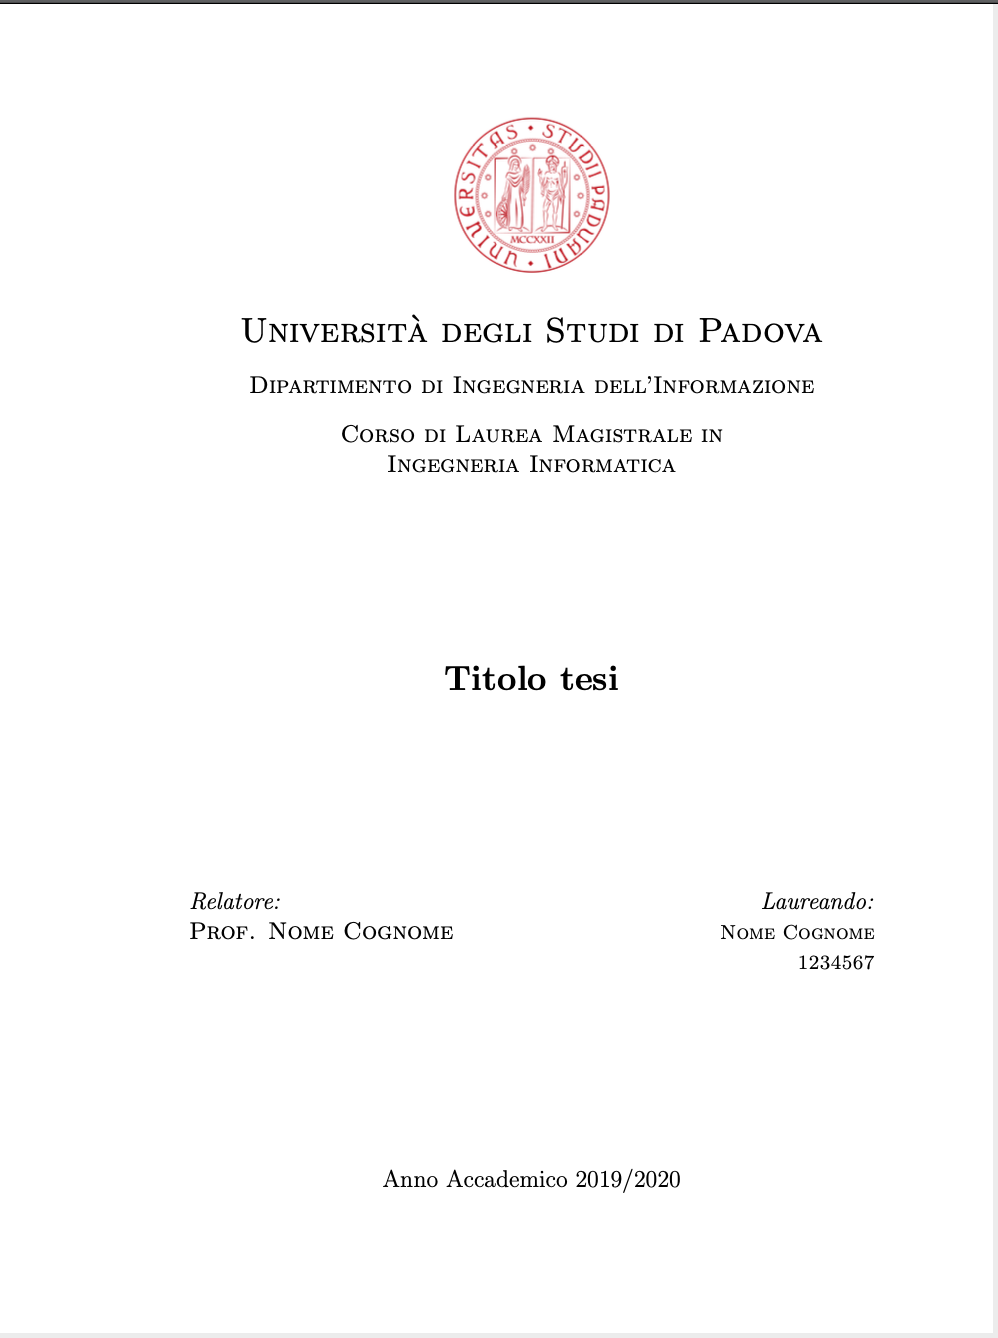 unipd master thesis